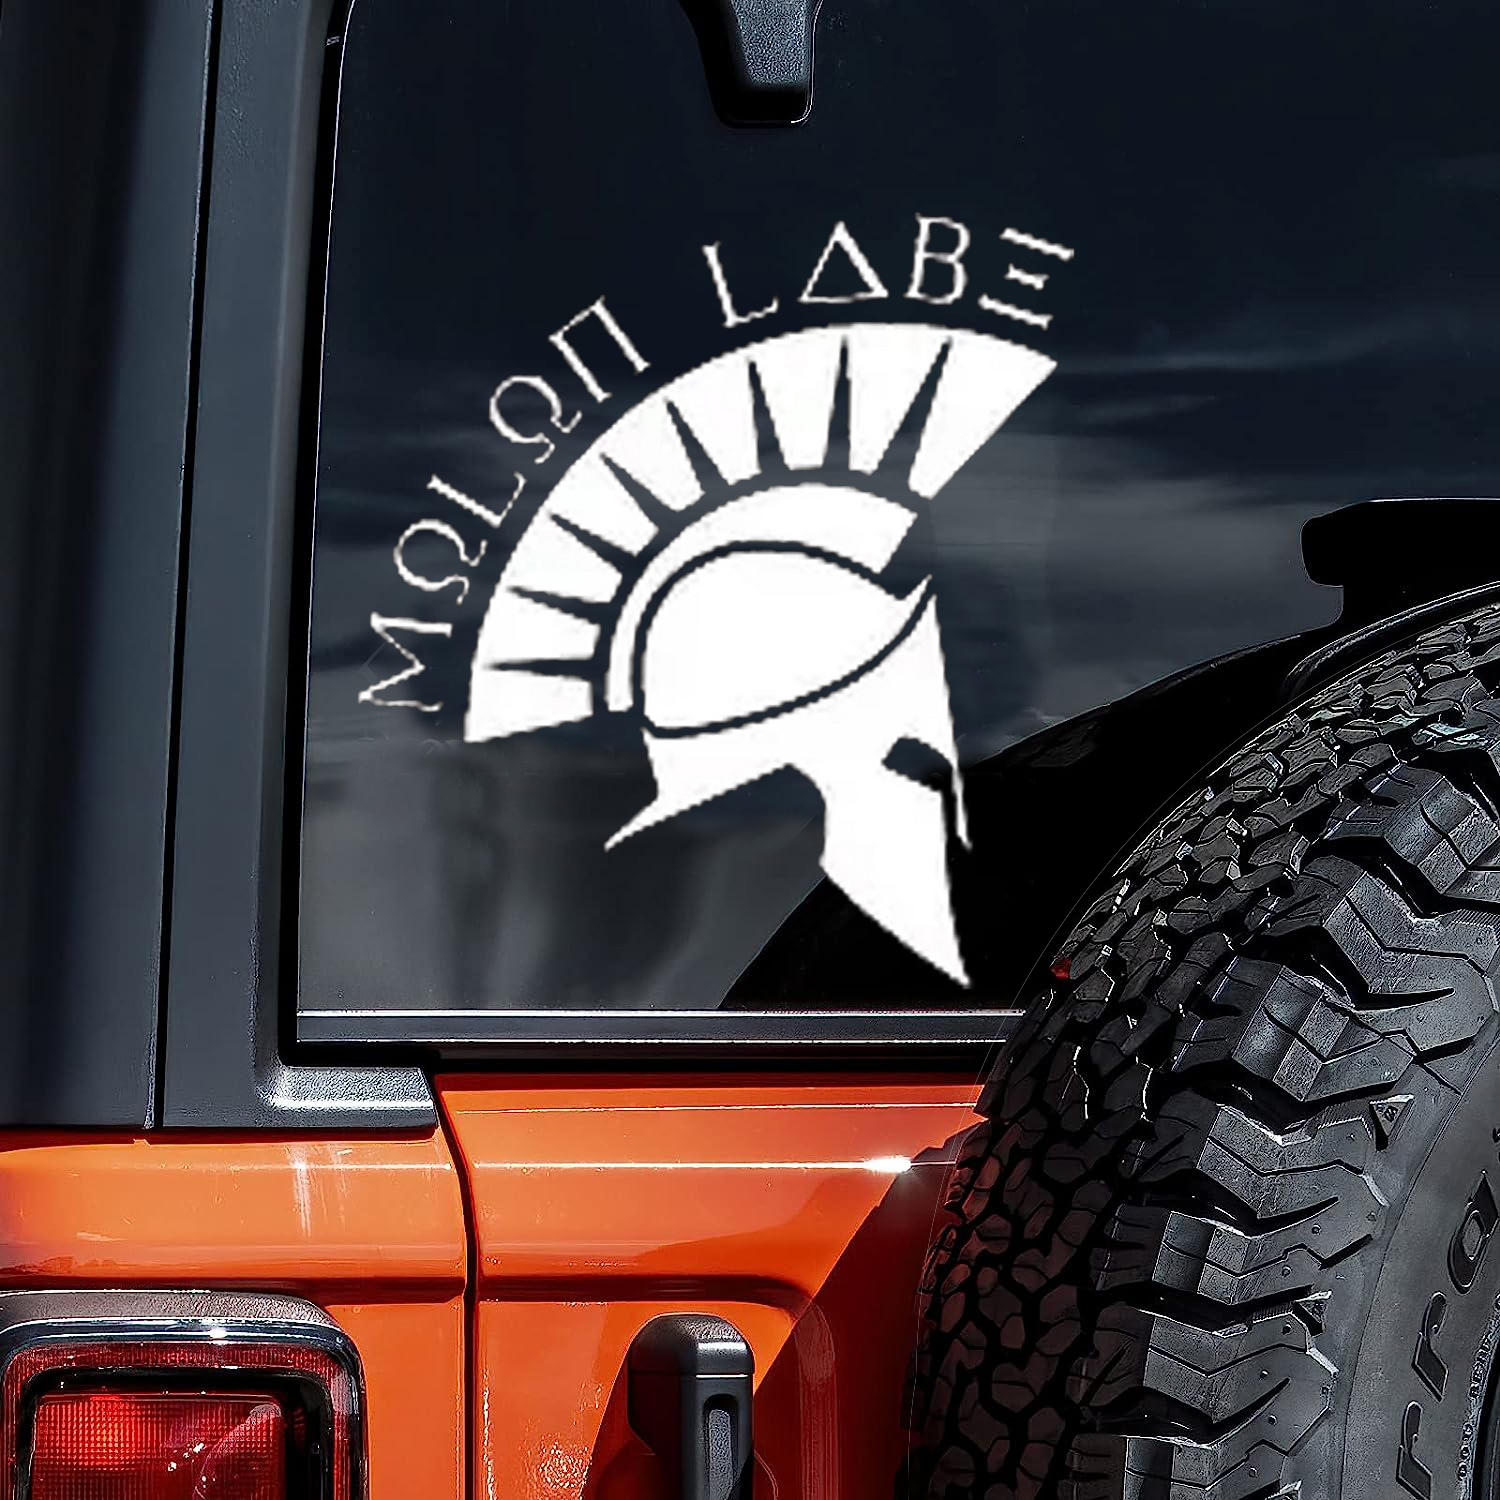 Molon Labe Cool Men Funny Car Stickers For Laptop Water Bottle Car Truck  Van SUV Motorcycle Vehicle Paint Window Wall Cup Toolbox Guitar Scooter  Decal